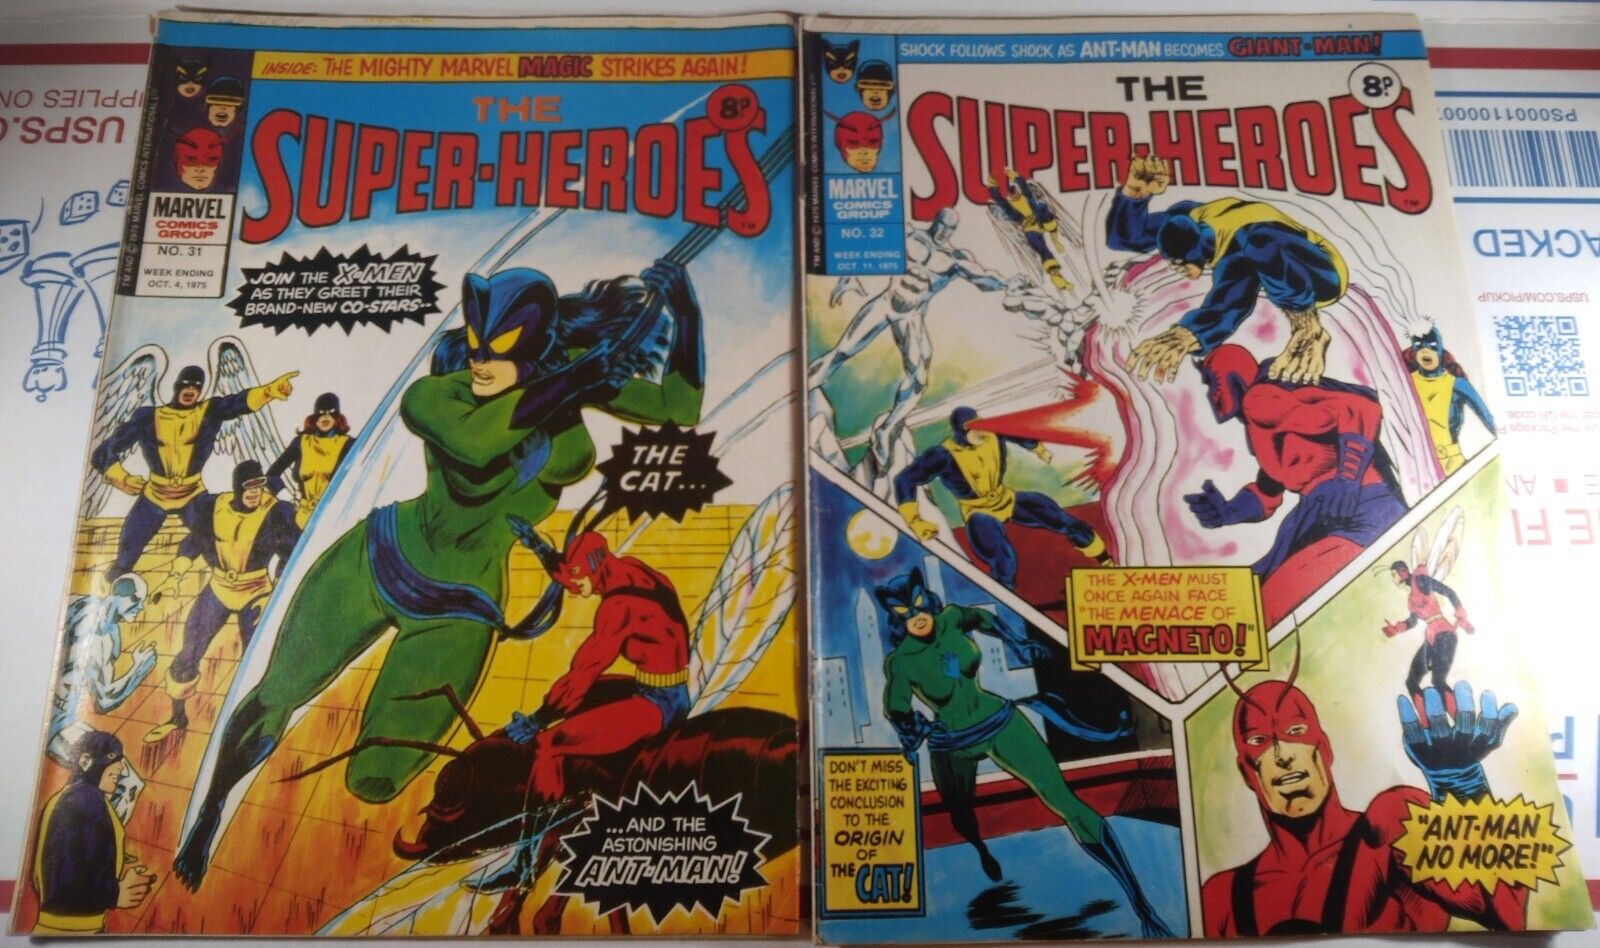 🔴🔥 THE SUPER-HEROES #31 #32 MARVEL UK 1975 🔑 THE CAT #1 TALES TO ASTONISH #49